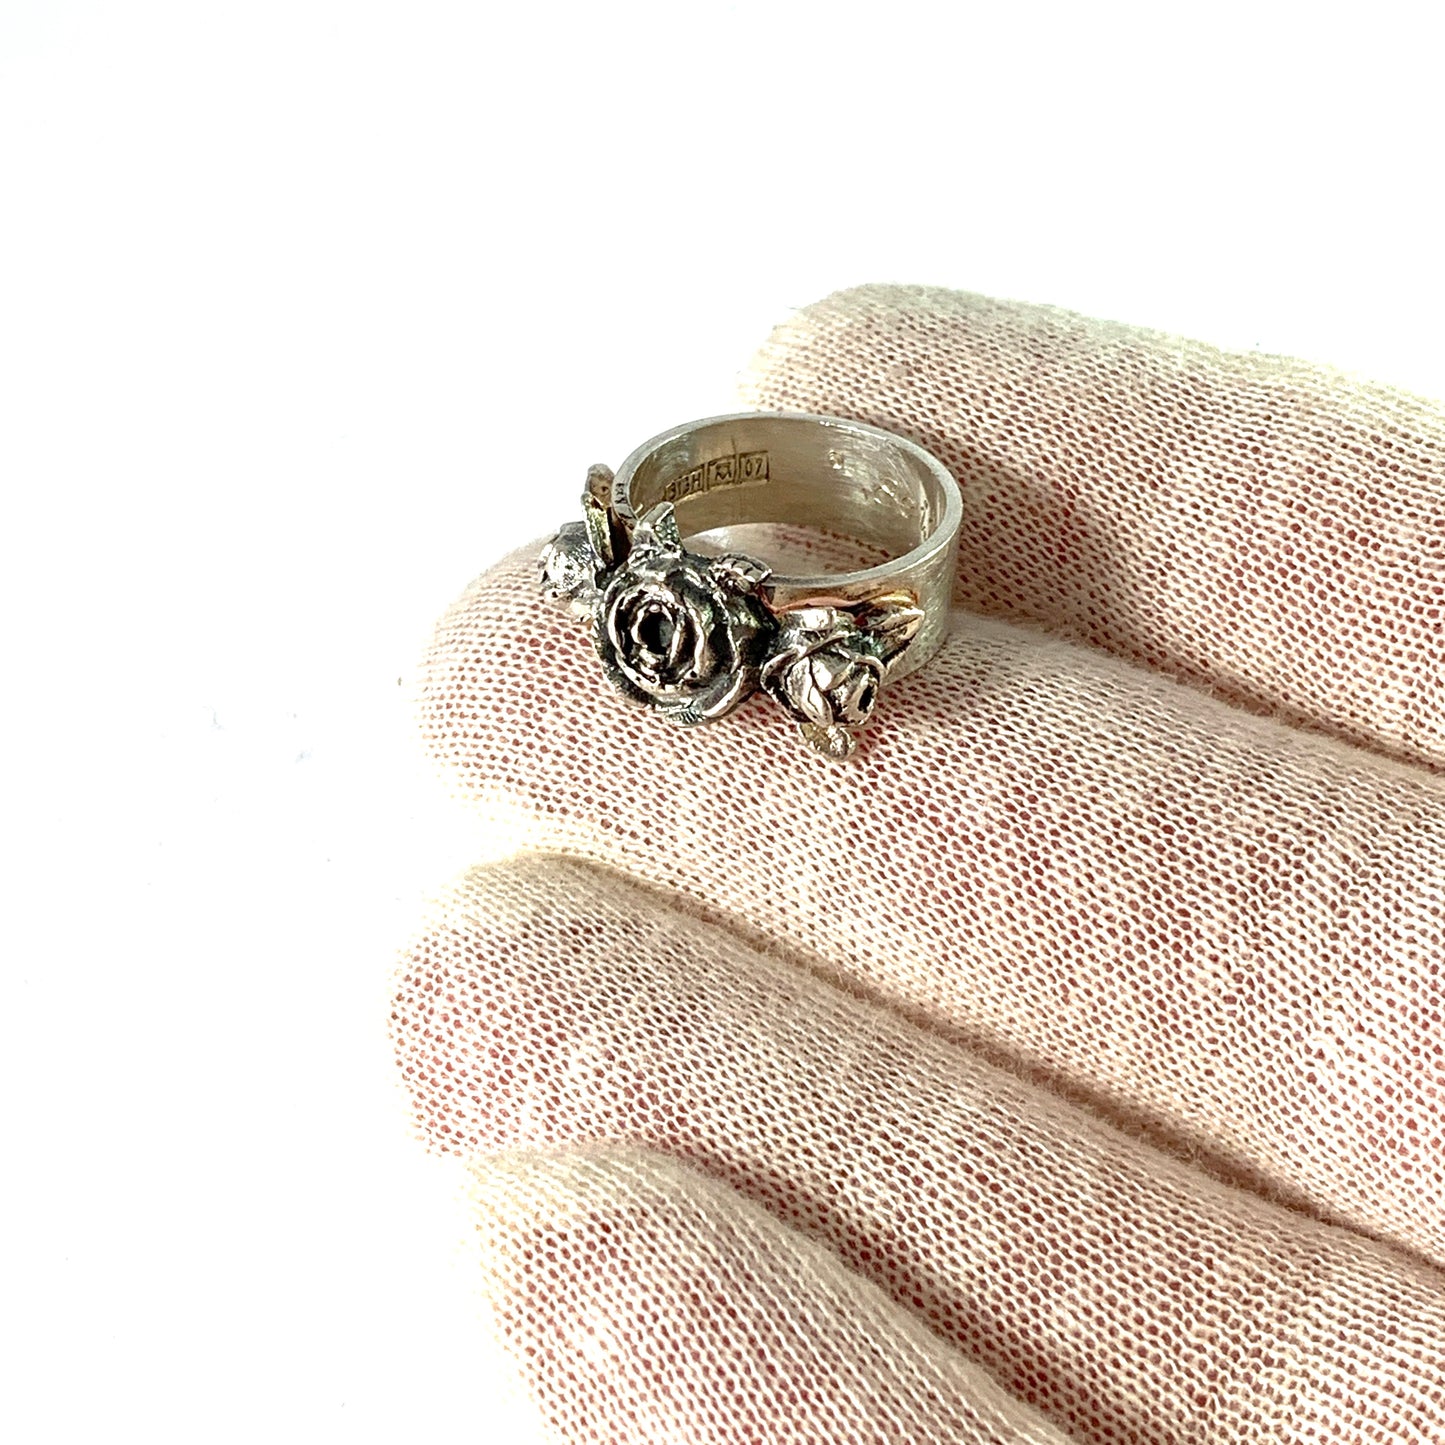 Turun Hopea, Finland 1967. Solid Silver Rose Flower Ring.